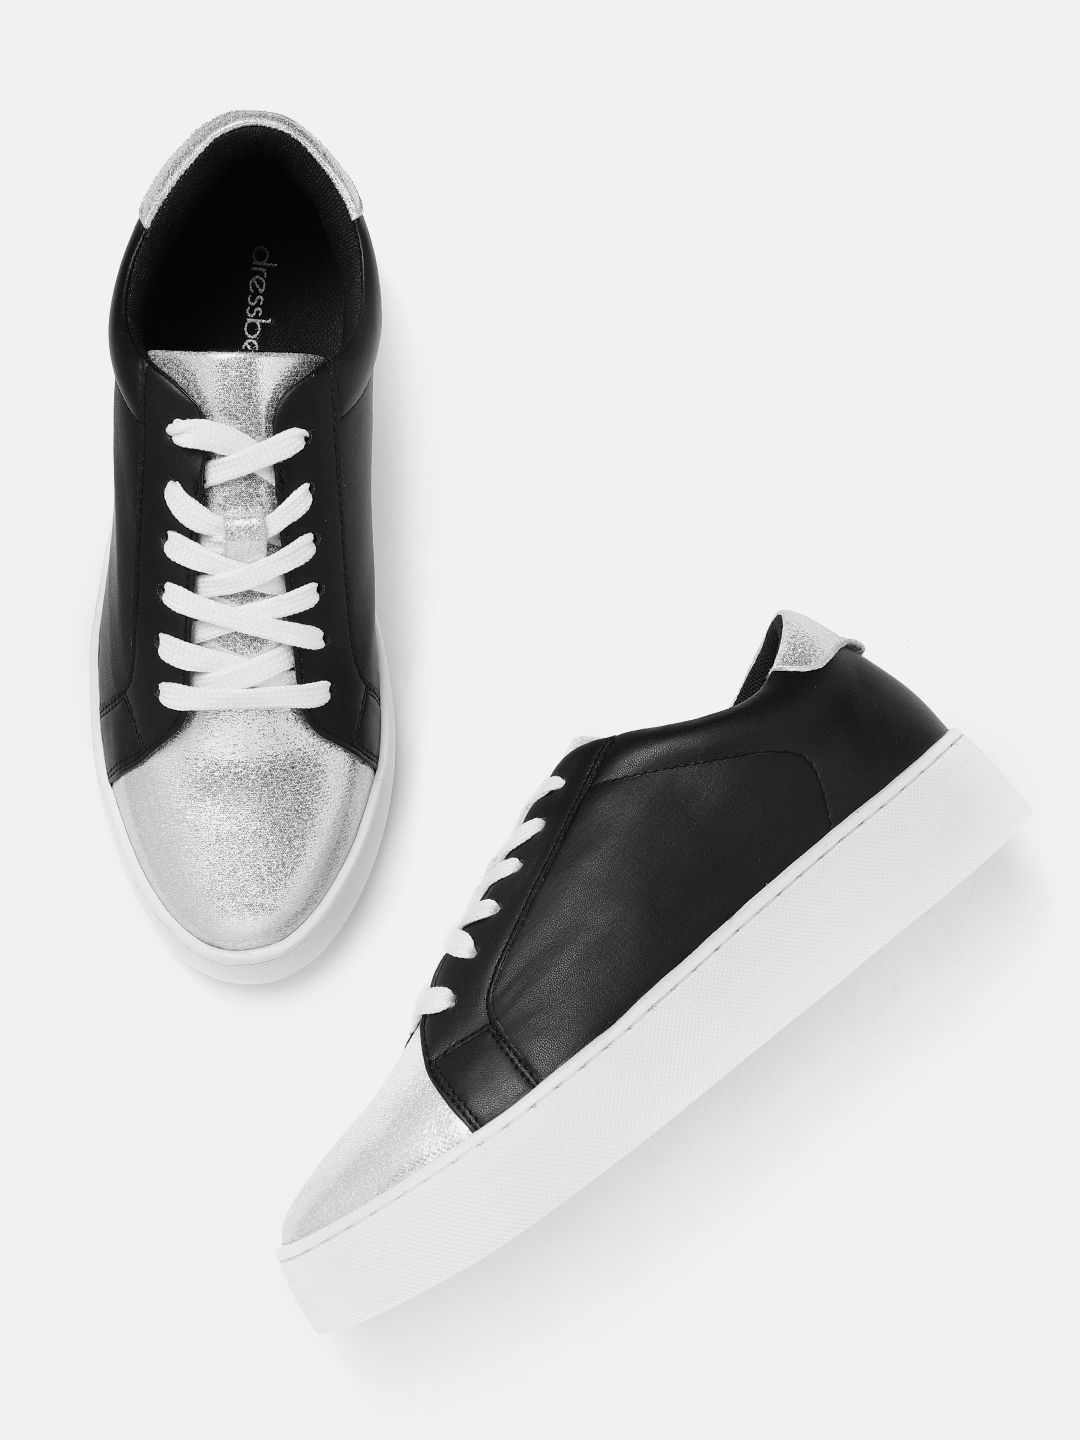 DressBerry Women Black & Silver-Toned Colourblocked Flatform Sneakers Price in India